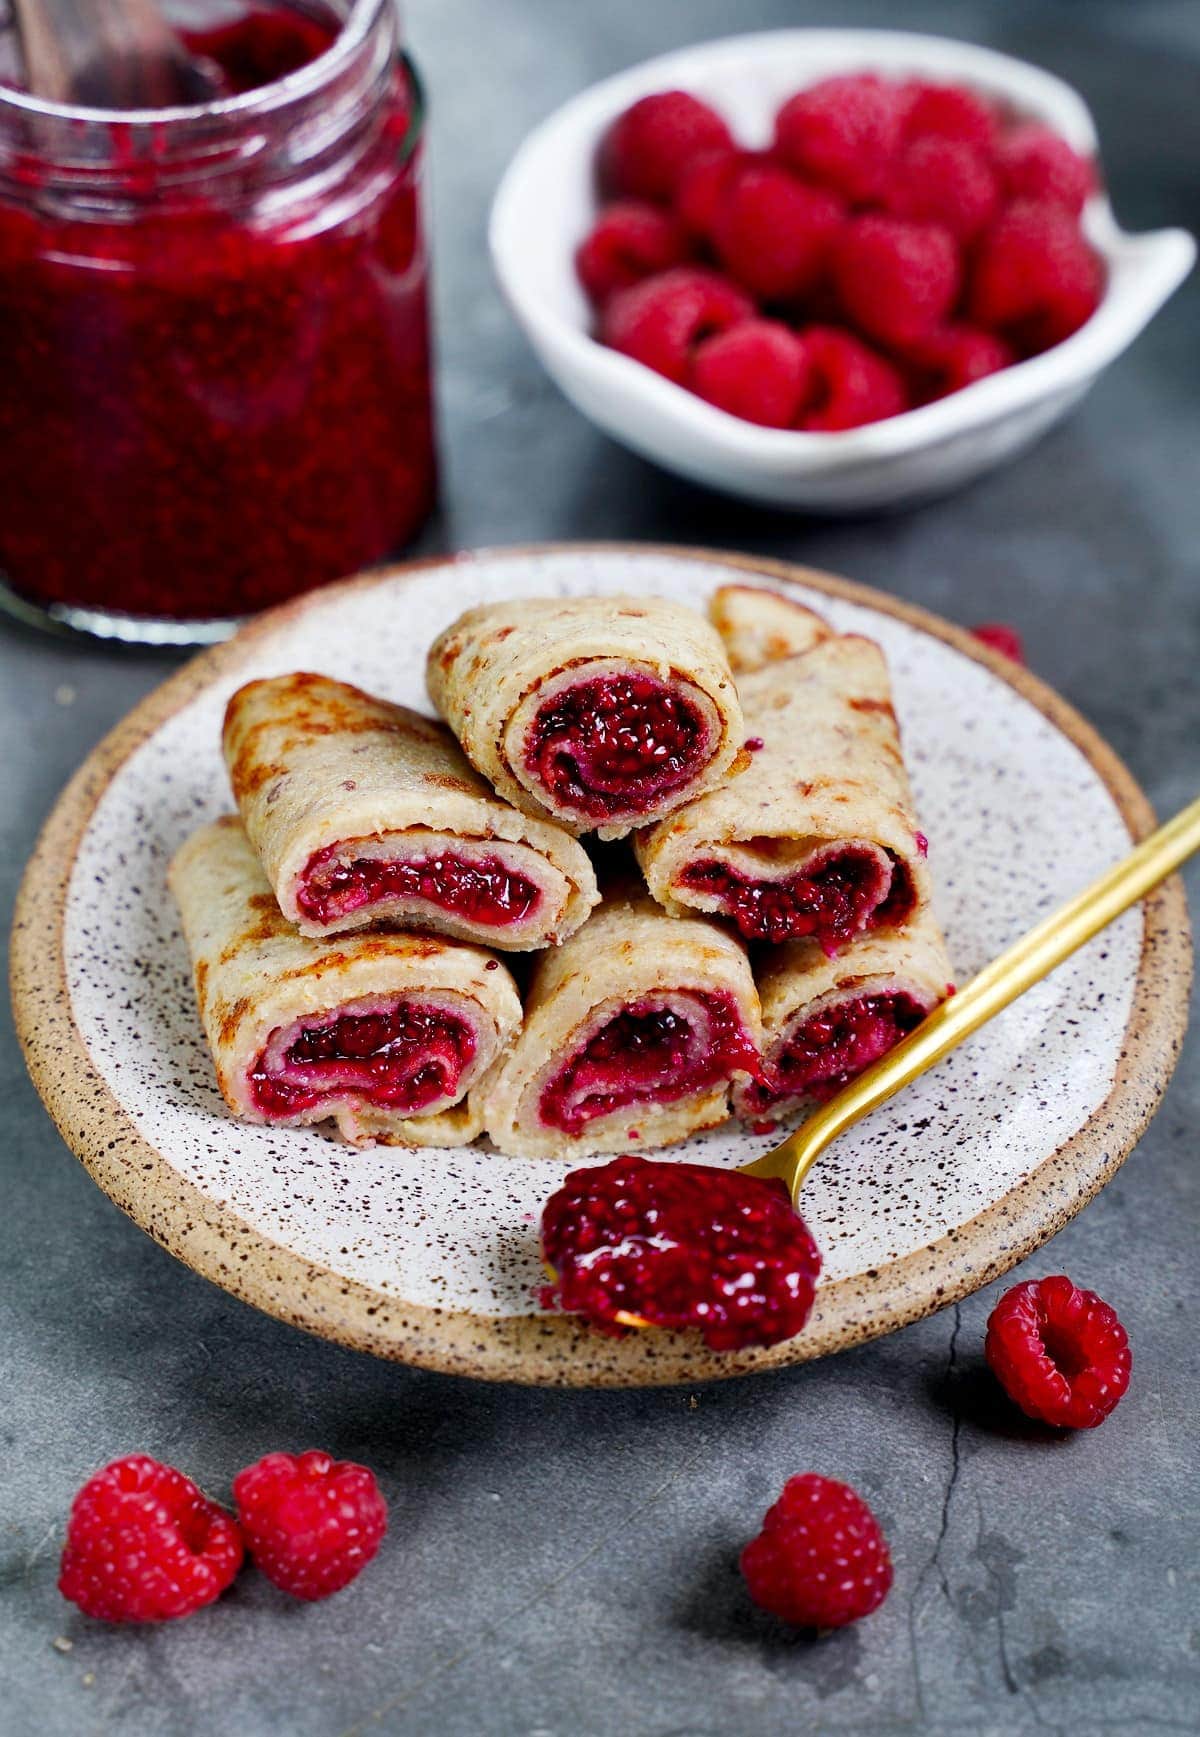 6 crepes rolled up and filled with raspberry jam